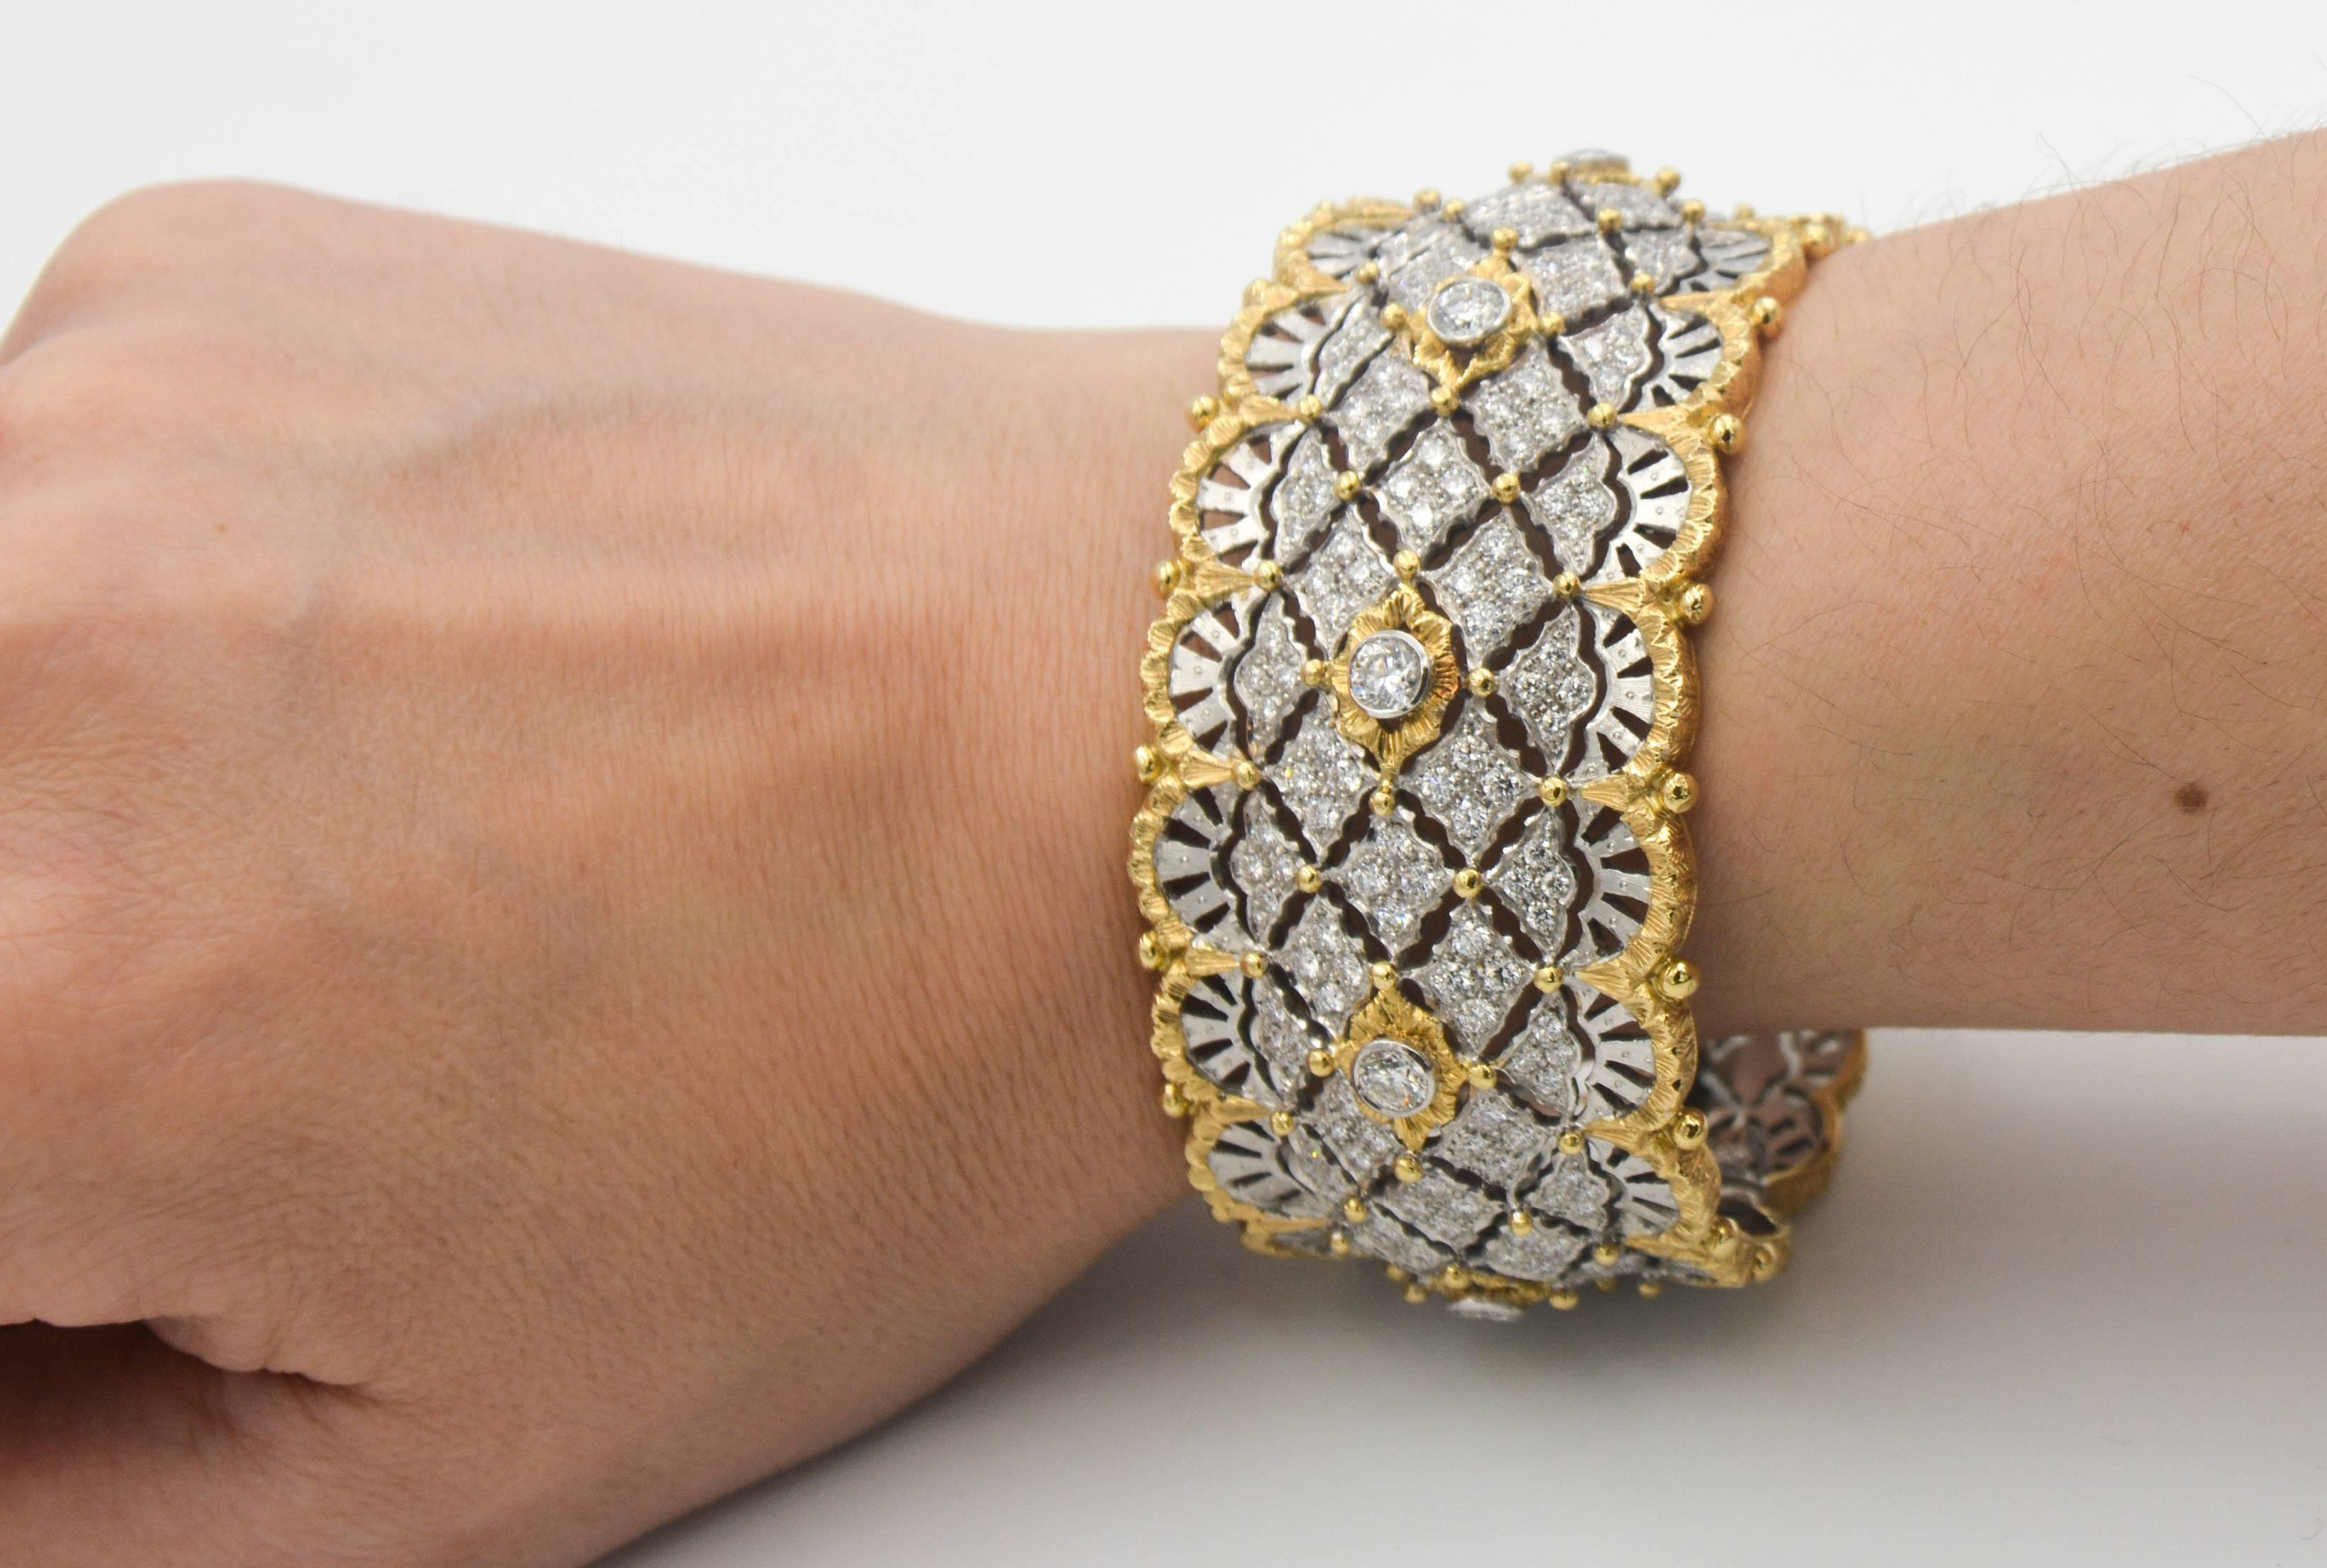 Beautiful Italian cuff bangle bracelet in 18kt white gold and 6.15ctw worth of diamonds, and 18kt yellow gold accents and scalloped trim.  This exquisite bracelet features a double hinged back for ease of wear.  